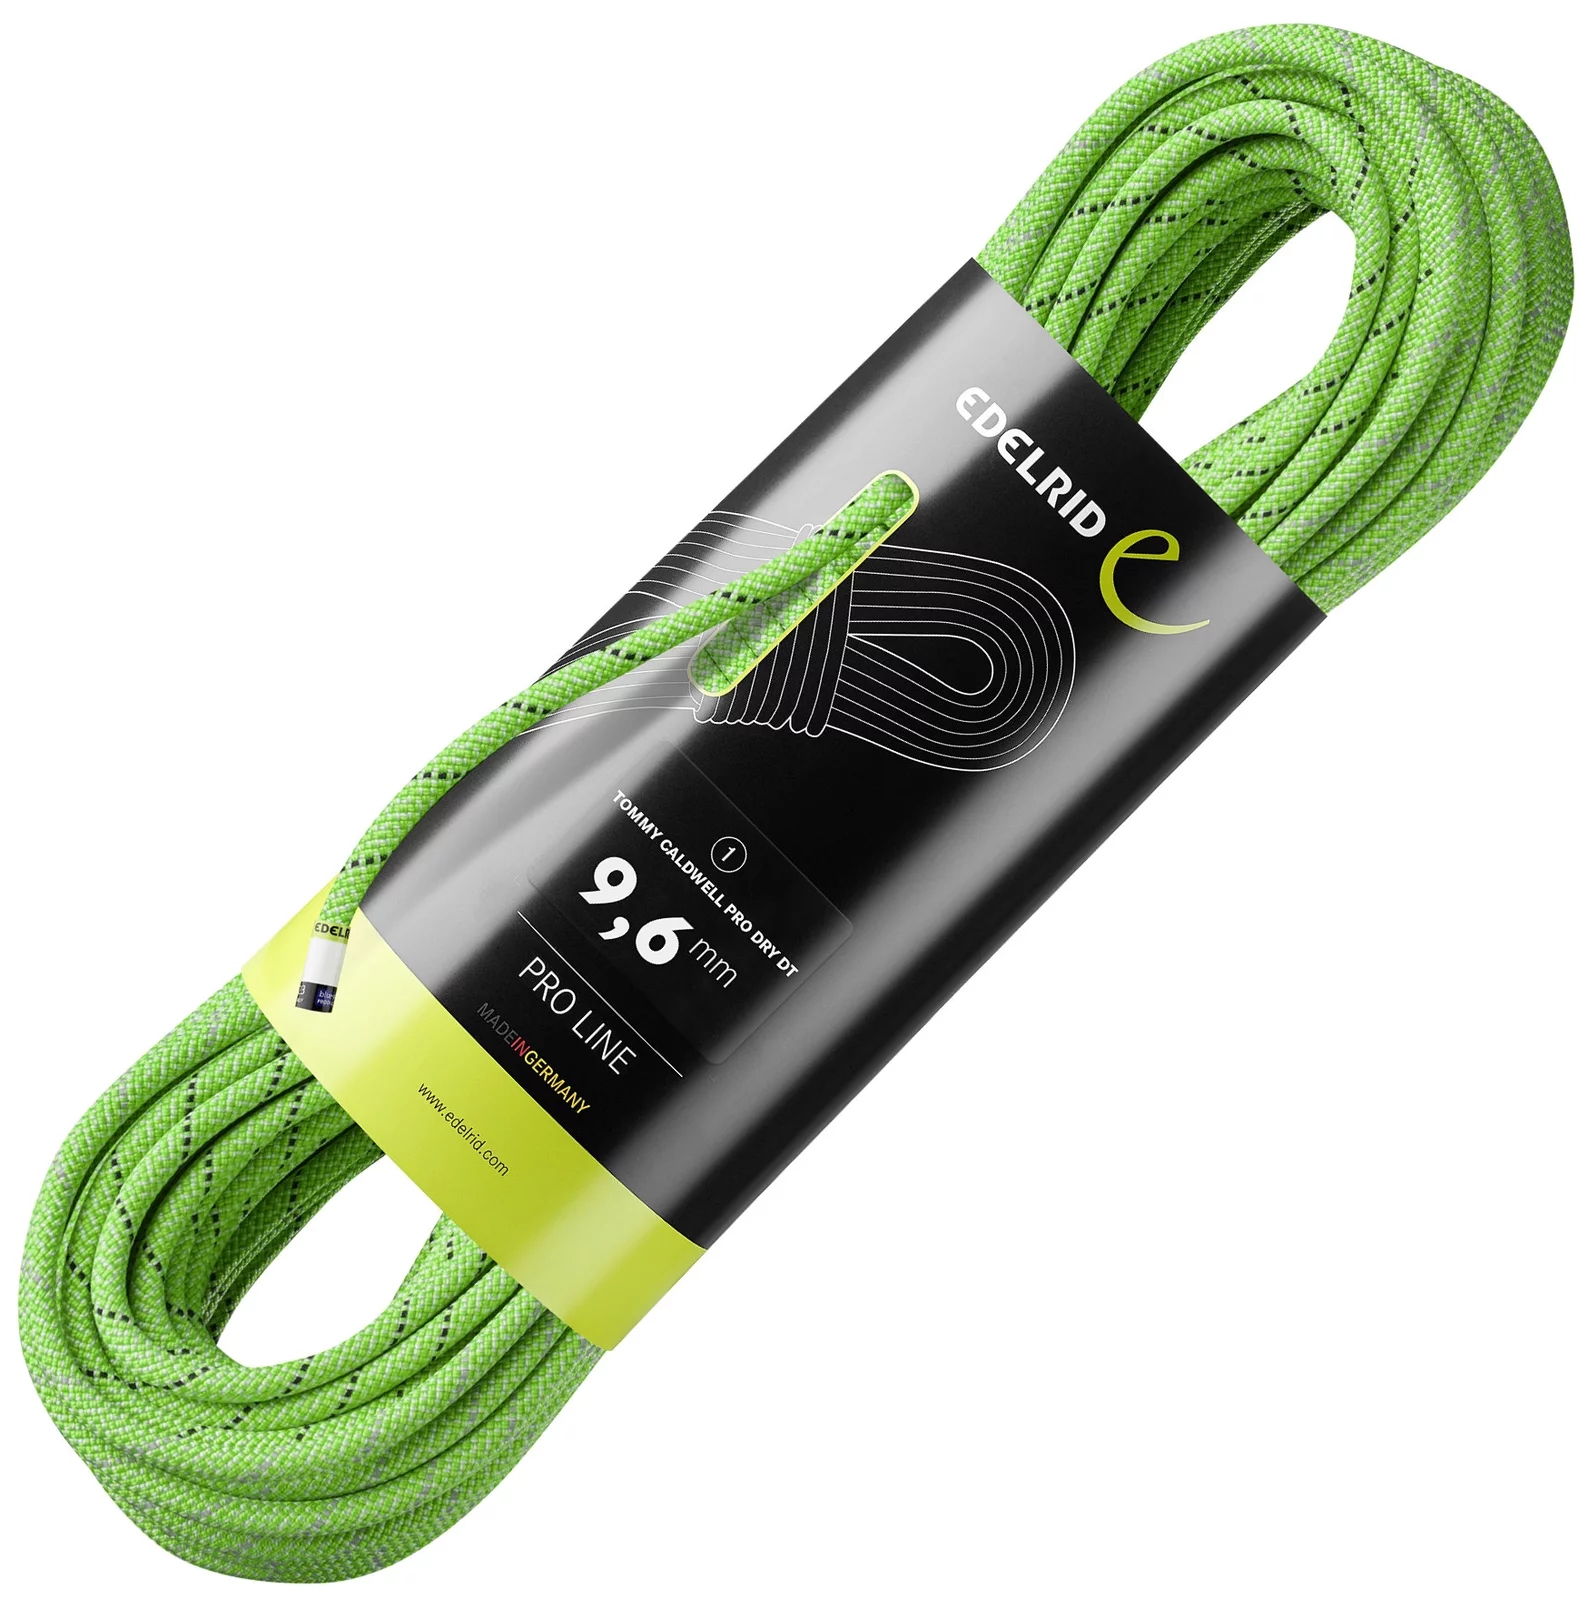 Edelrid Tommy Caldwell Pro Dry DT 9,6mm - Kletterseil